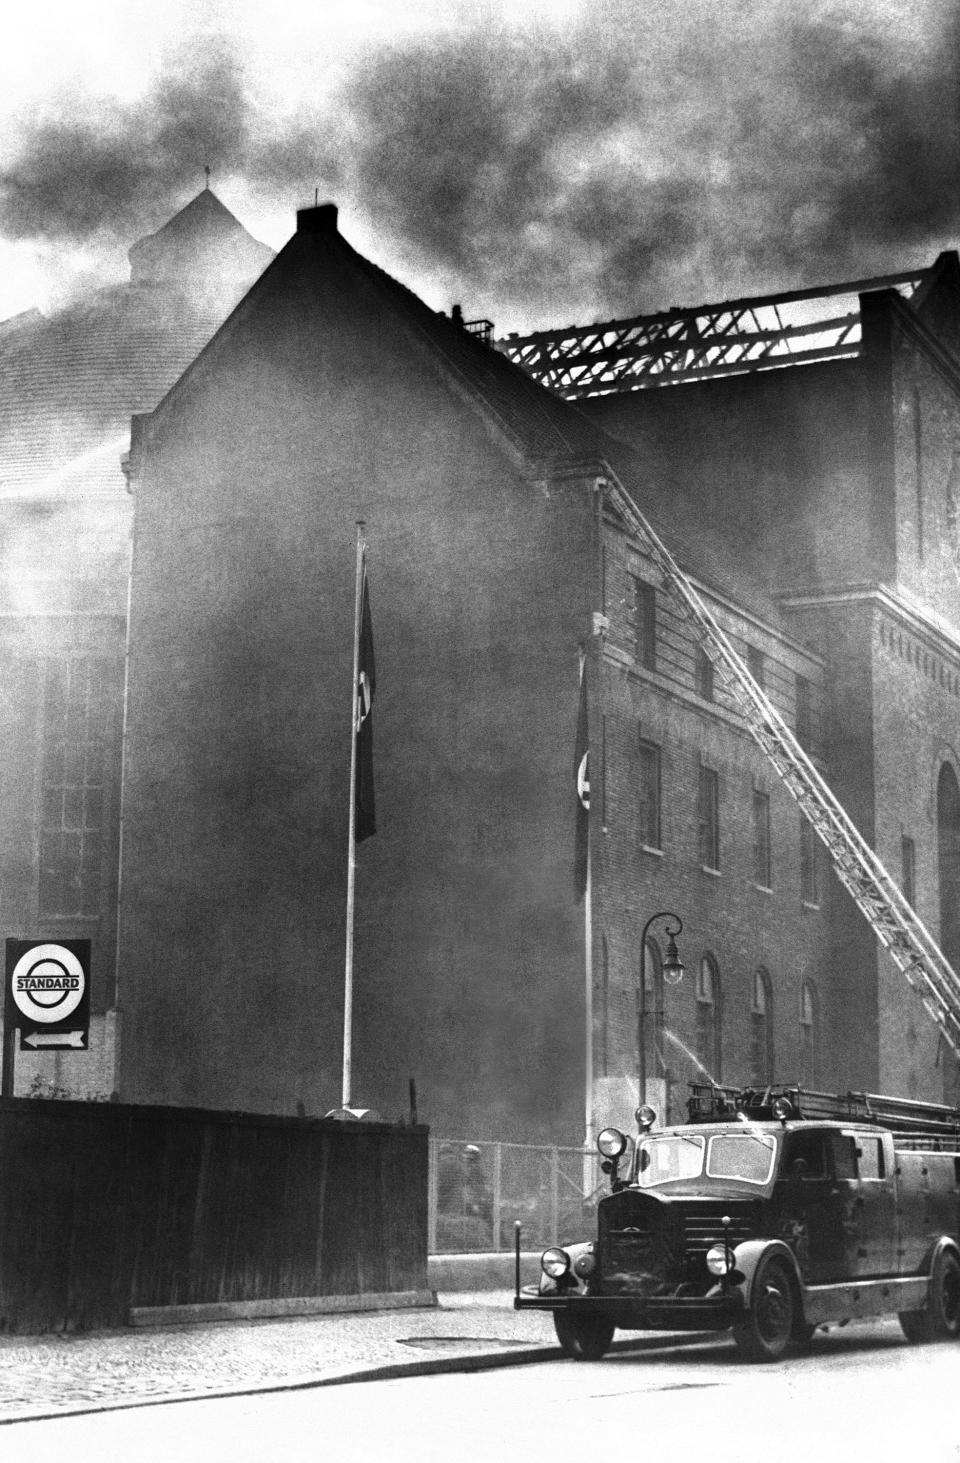 FILE - A fire truck with an extended ladder is parked on Prinzregenten Street in Berlin next to a synagogue that was set on fire on Nov. 10, 1938, during the organized Kristallnacht rampage carried out by Nazi paramilitary forces and German civilians over two days. During the violence perpetrators set fire to hundreds of synagogues, looted thousands of Jewish businesses and attacked Jews throughout Germany. The Conference on Jewish Material Claims Against Germany, also referred to as the Claims Conference, presents an interactive, virtual reality experience project to tell the story about the pogroms of the Kristallnacht or 'Night of broken glass'. (AP Photo, File)